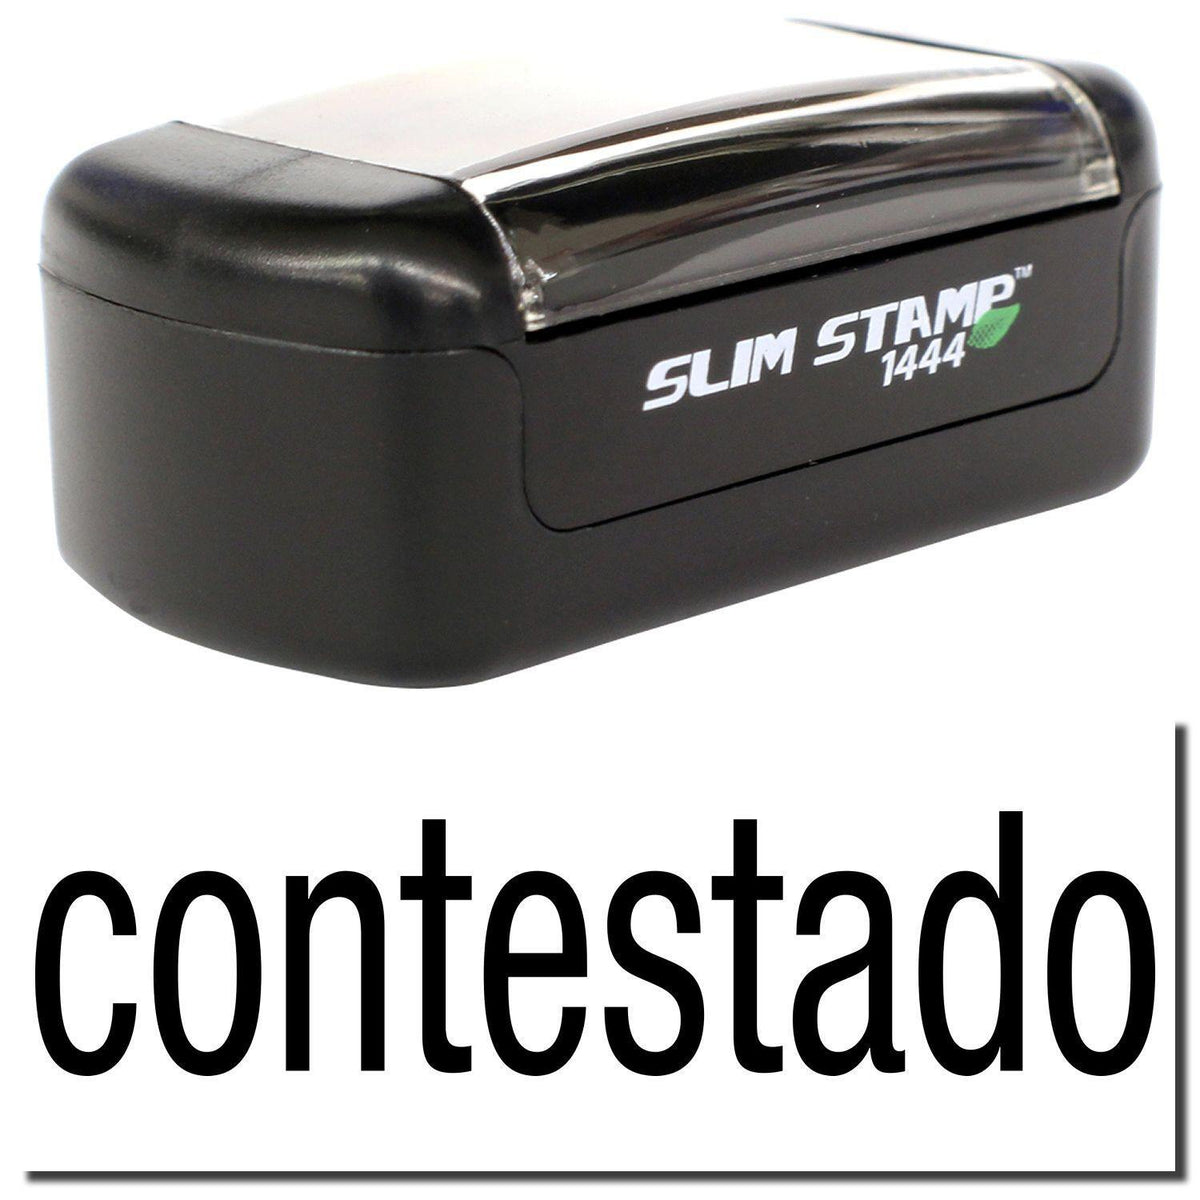 A stock office pre-inked stamp with a stamped image showing how the text &quot;contestado&quot; is displayed after stamping.